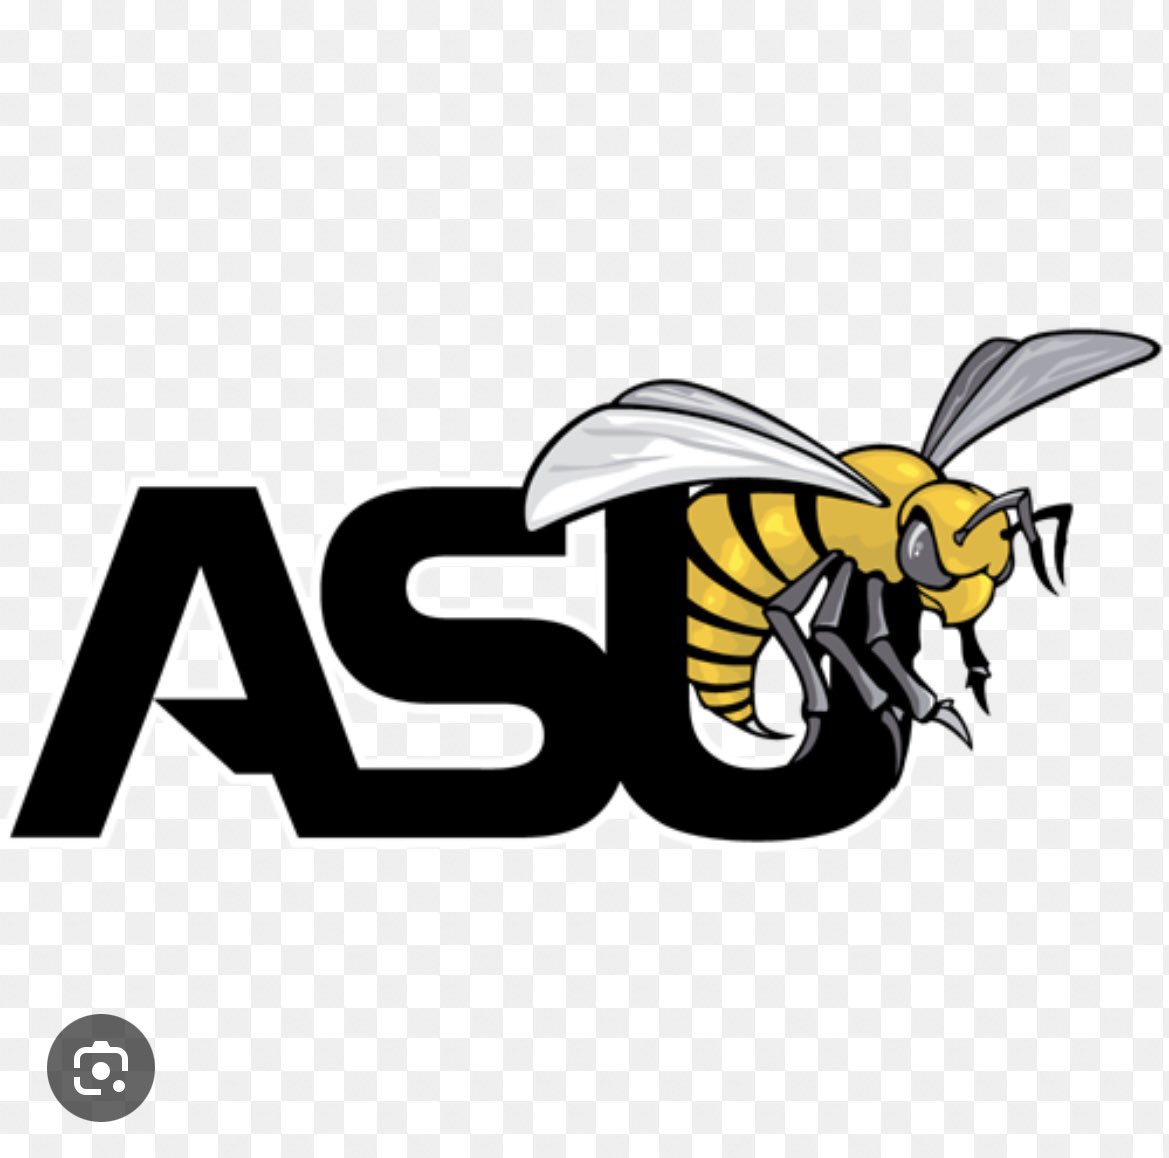 After a great conversation with @CoachBrowne72 @AmpDavisCoach i’m Blessed to recieve my first D1 offer to Alabama State University 🐝